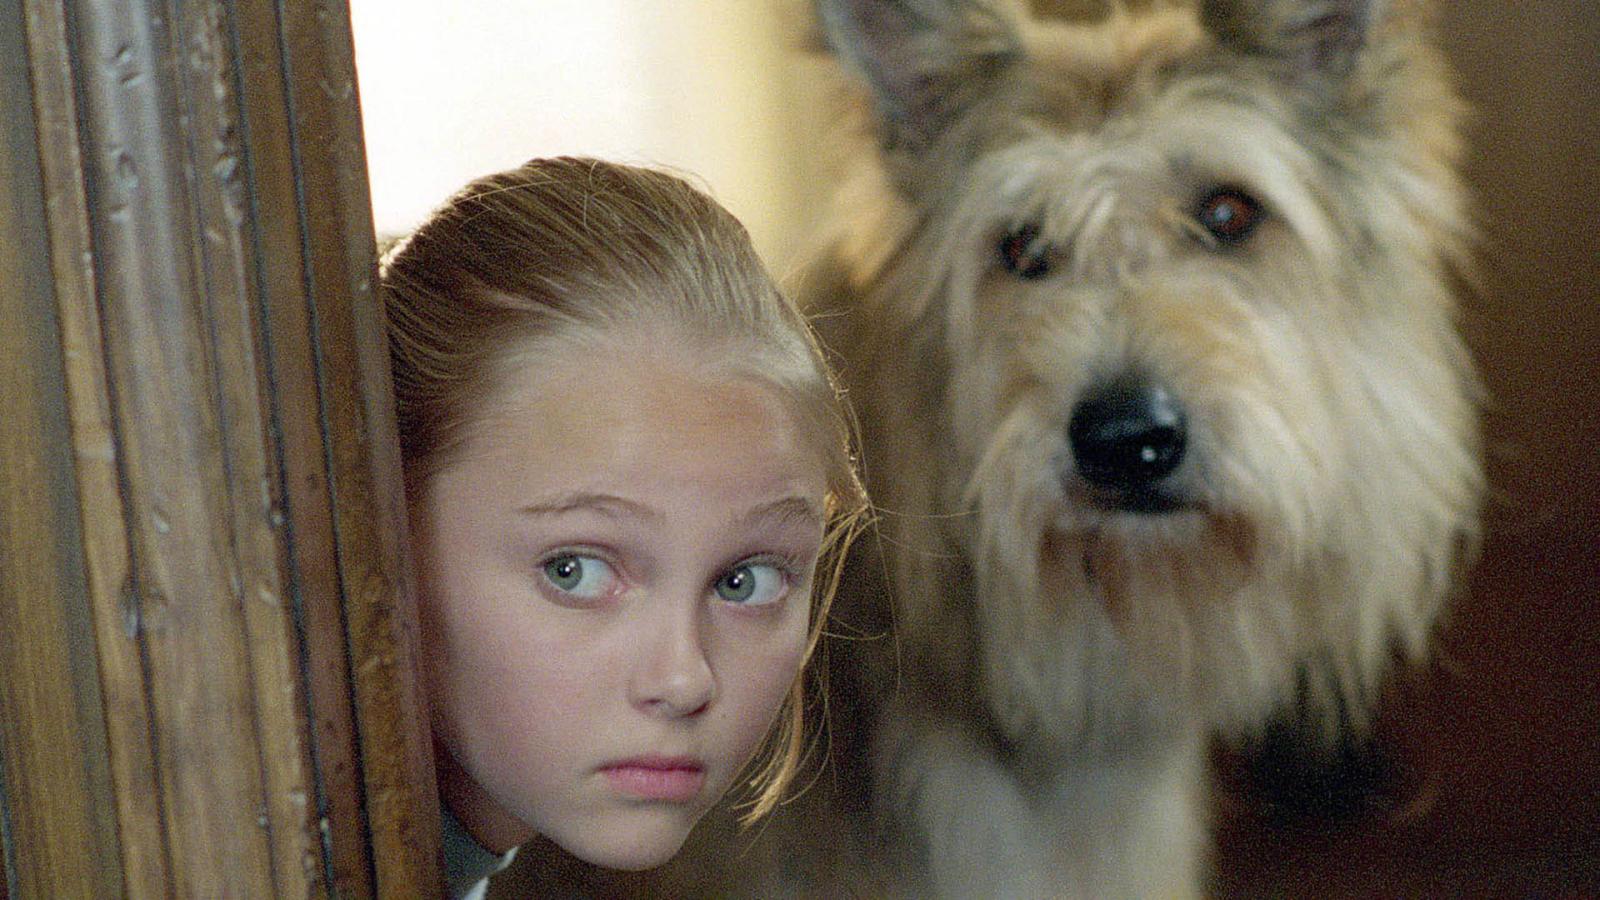 15 Lesser-Known Family Movies That Will Warm Your Heart - image 9